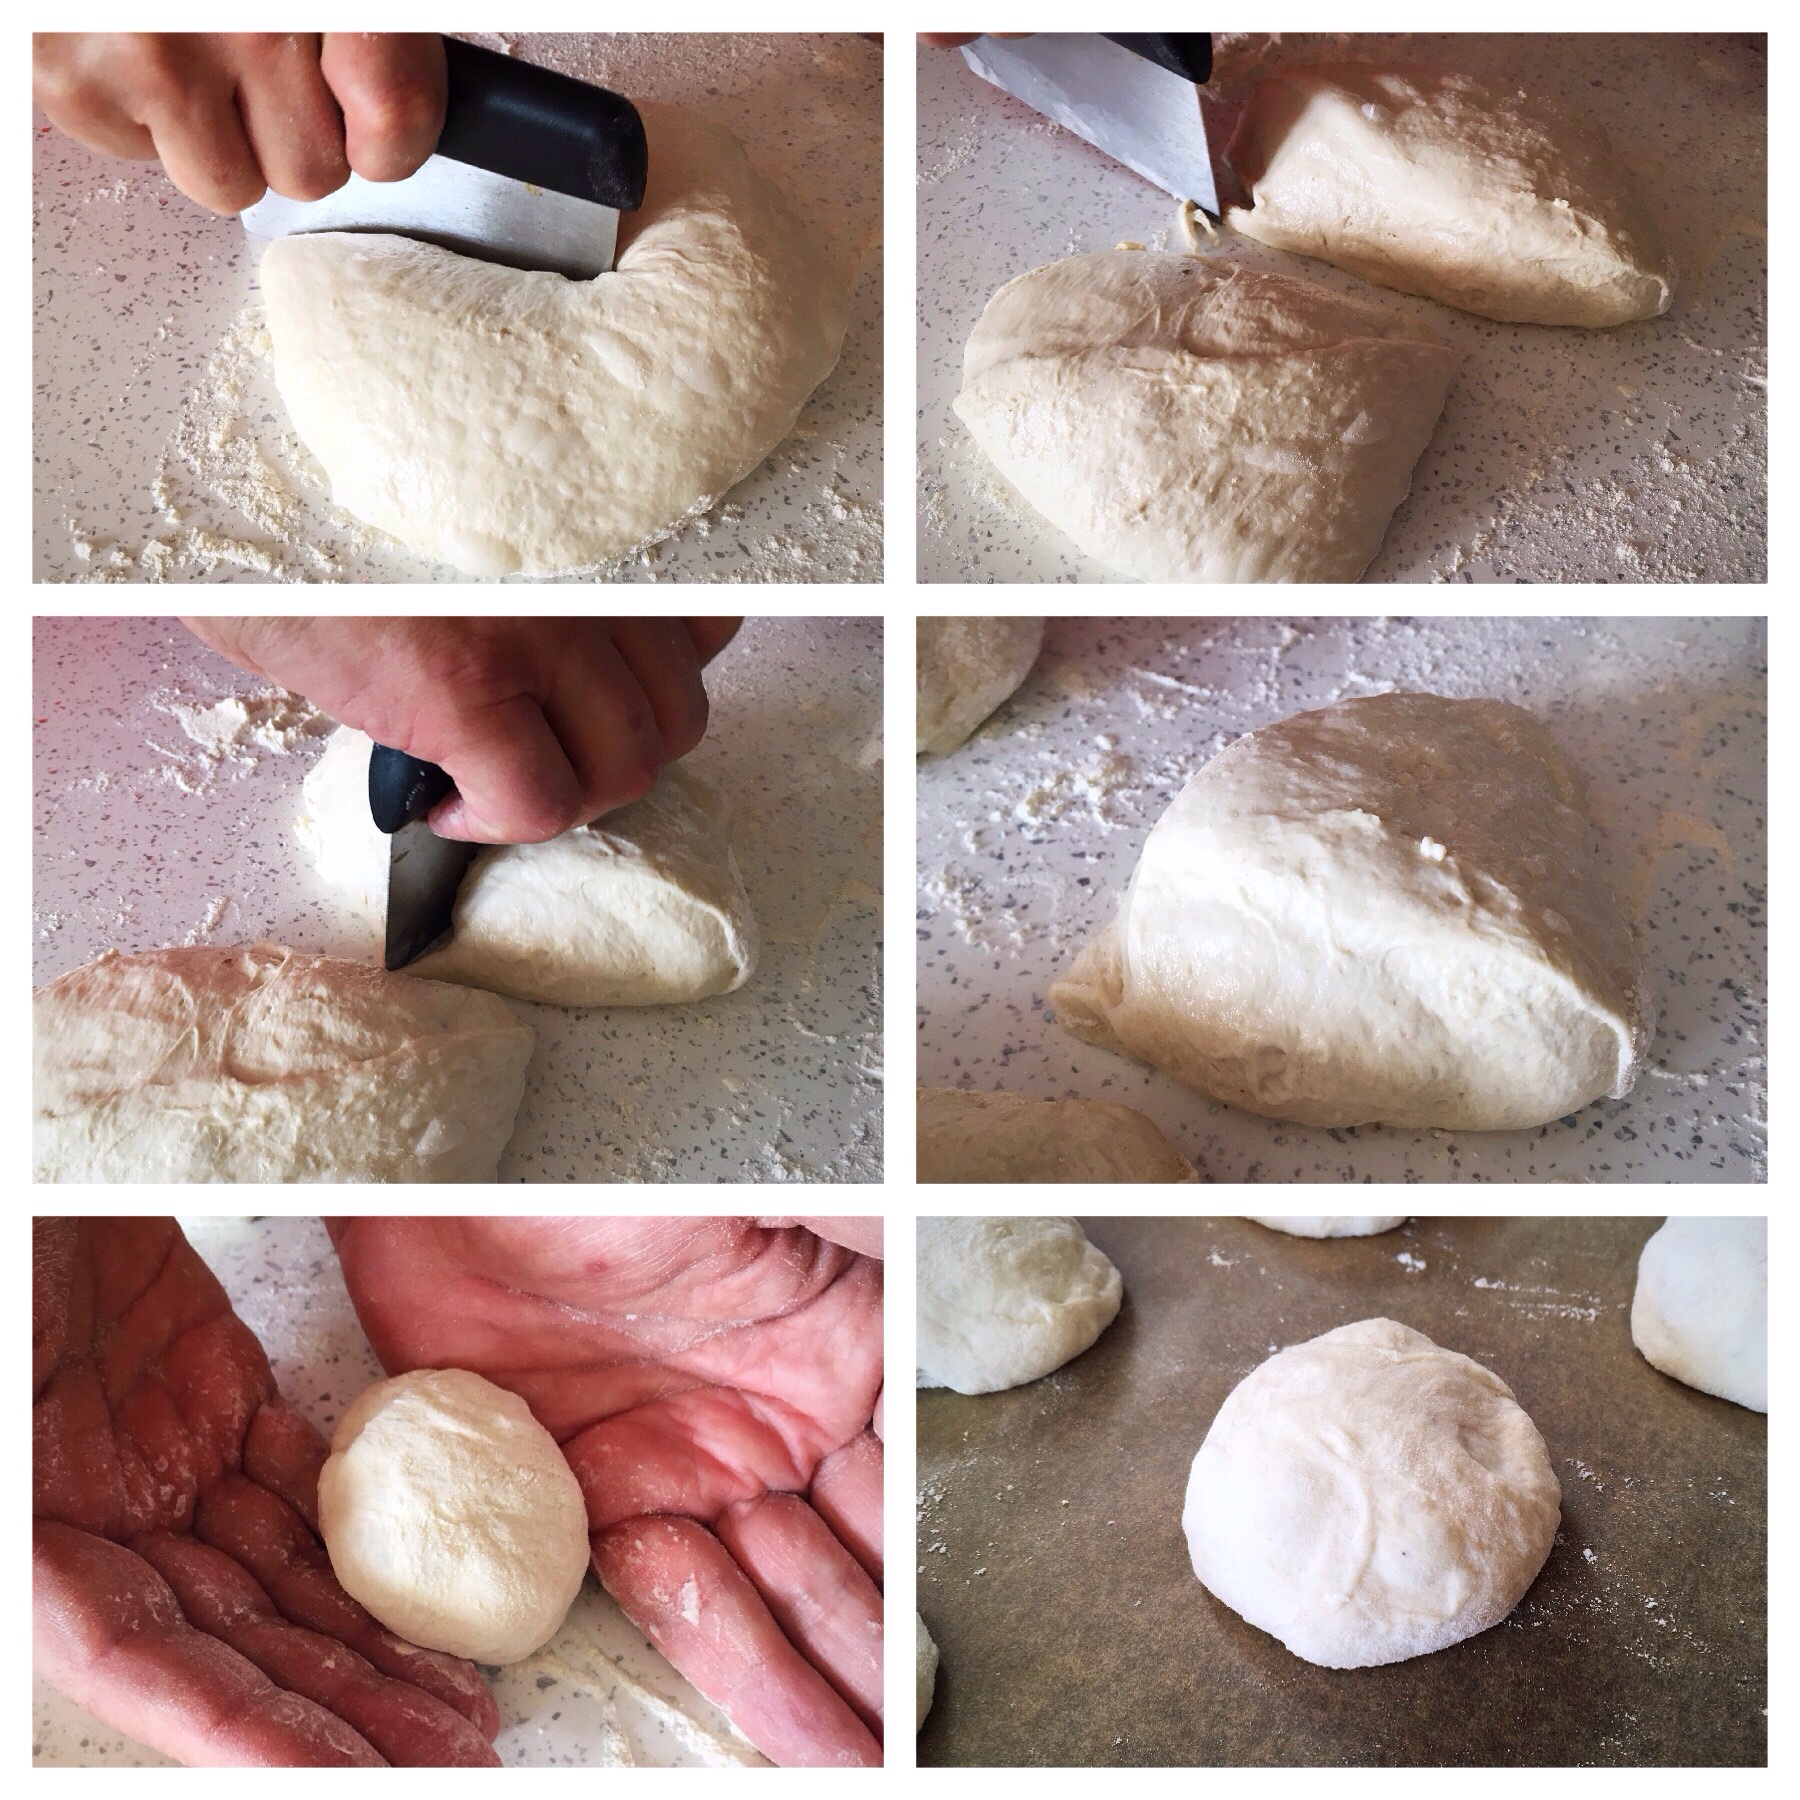 A collage of photos showing how to make bread.